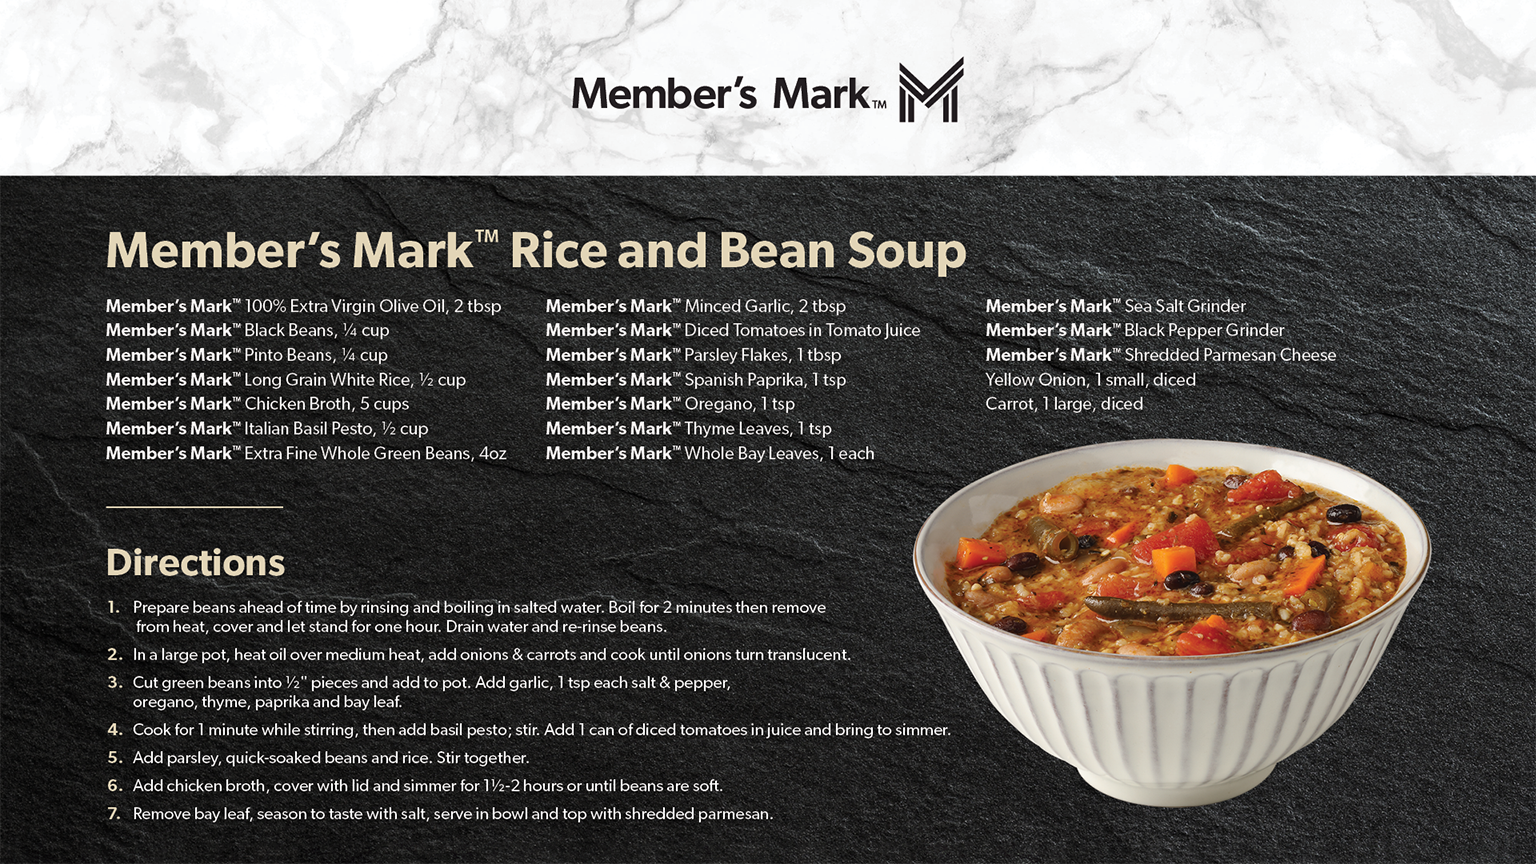 Ingredients and recipe for Member’s Mark Rice & Bean Soup.